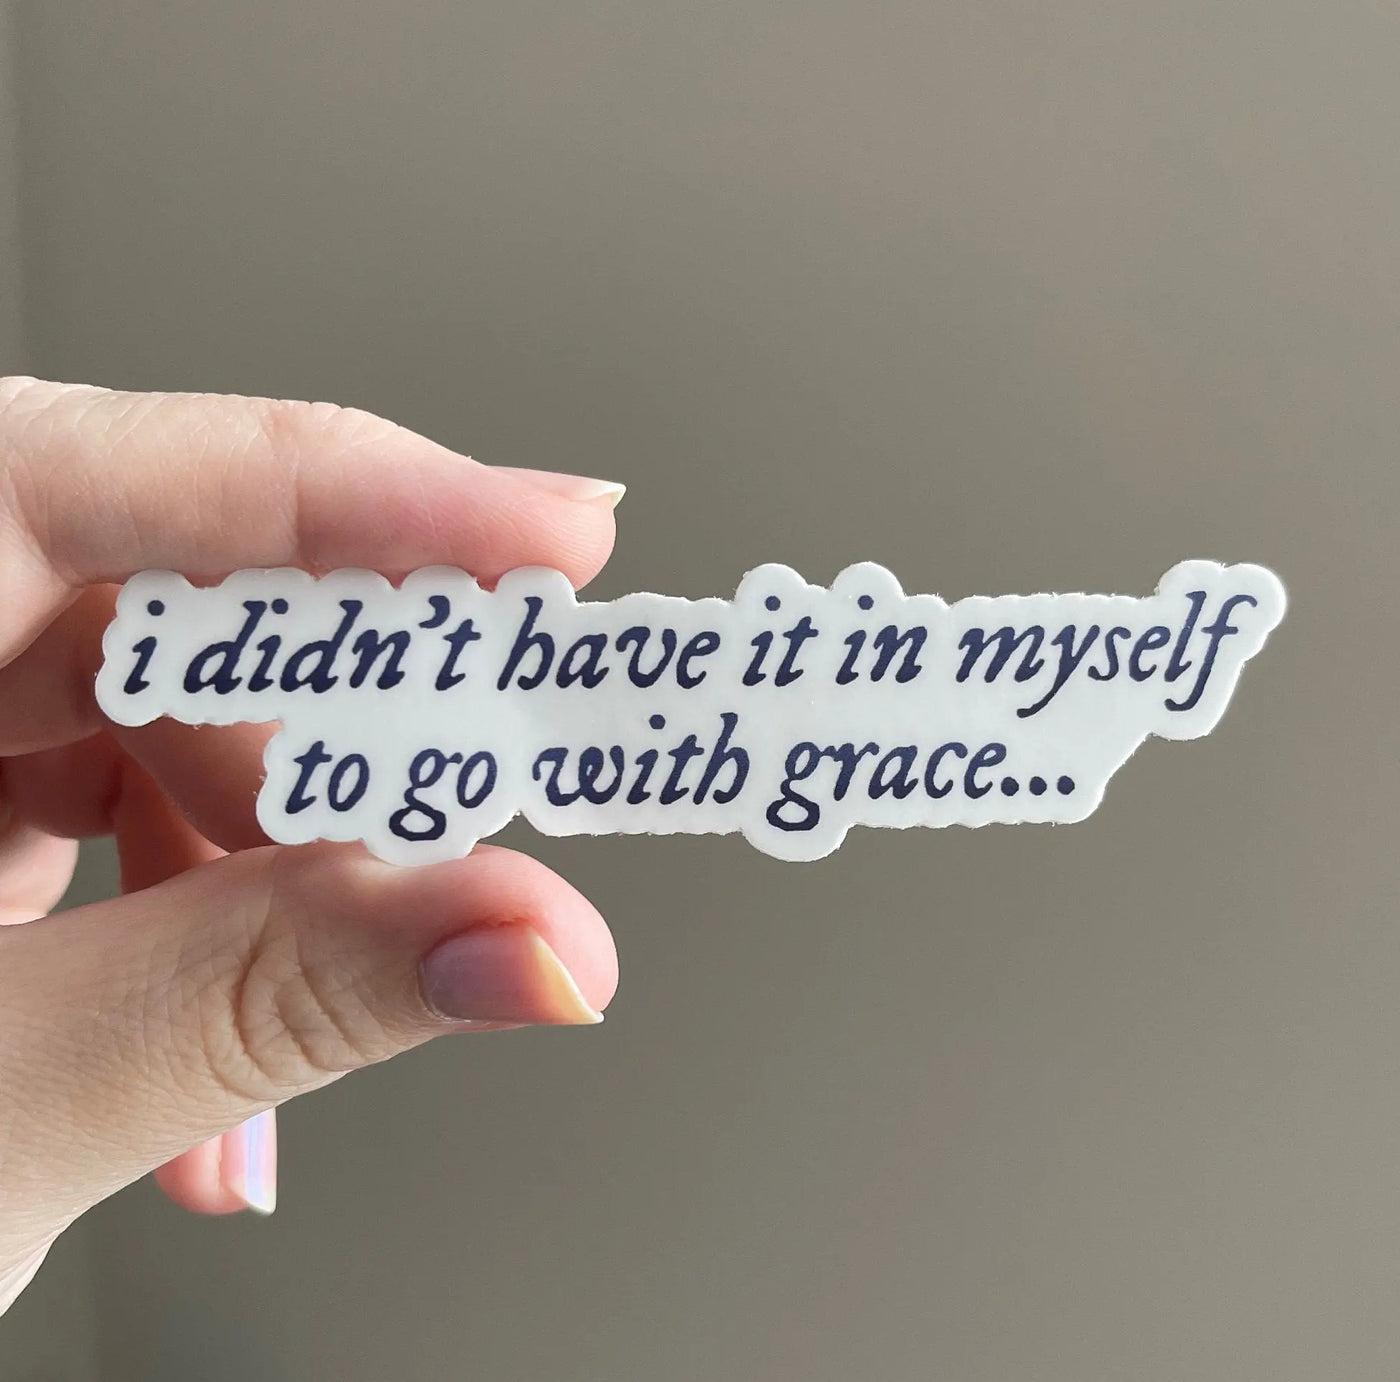 I didn't have it in myself to go with grace sticker MangoIllustrated